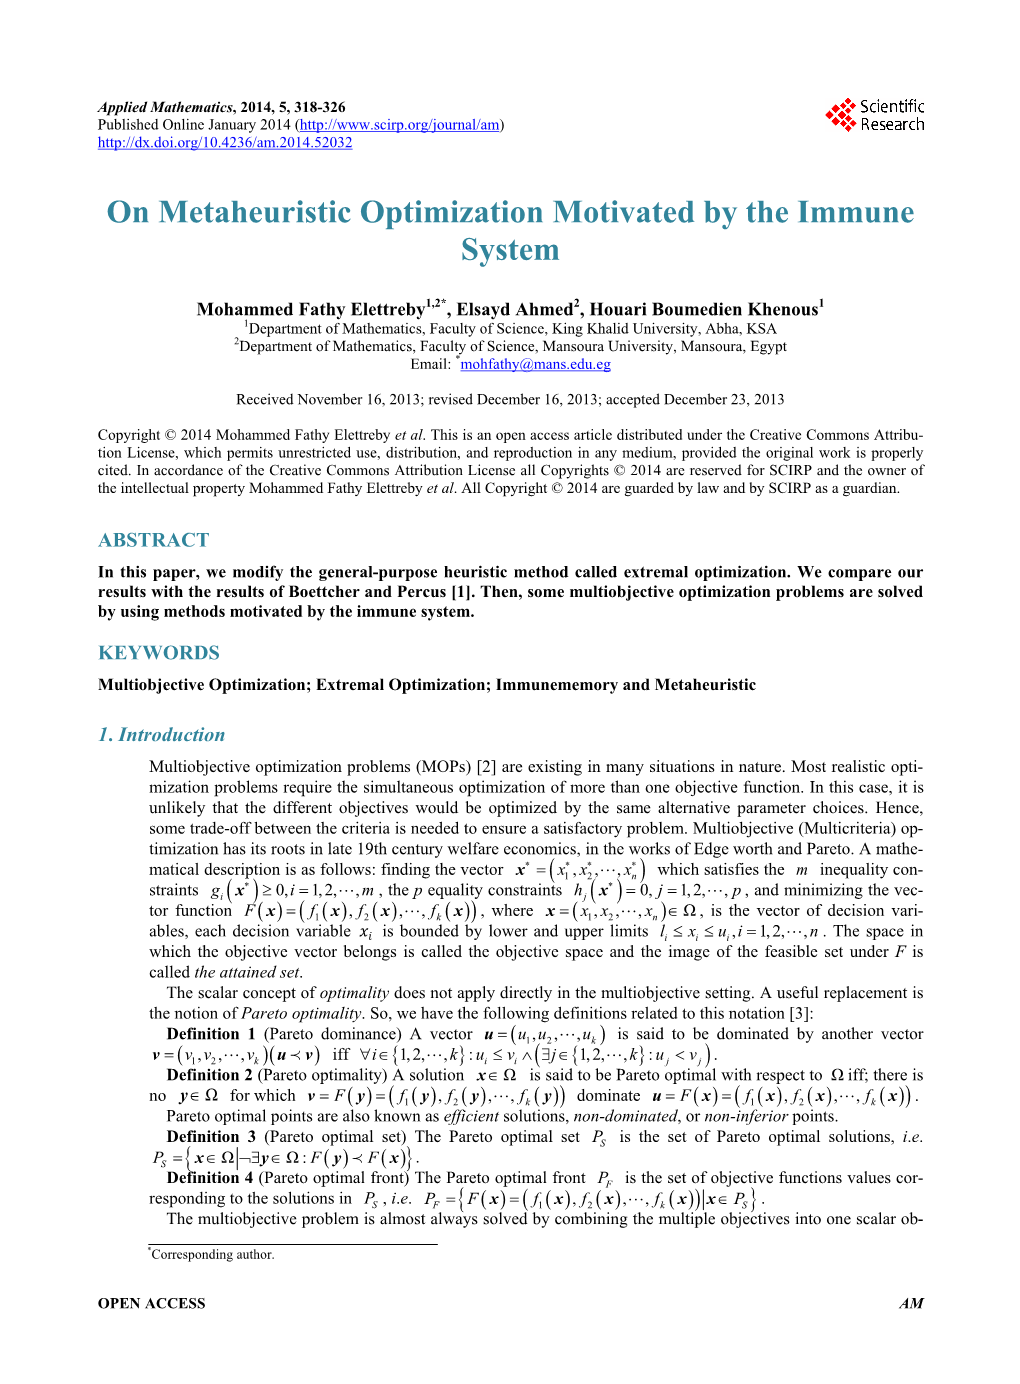 On Metaheuristic Optimization Motivated by the Immune System